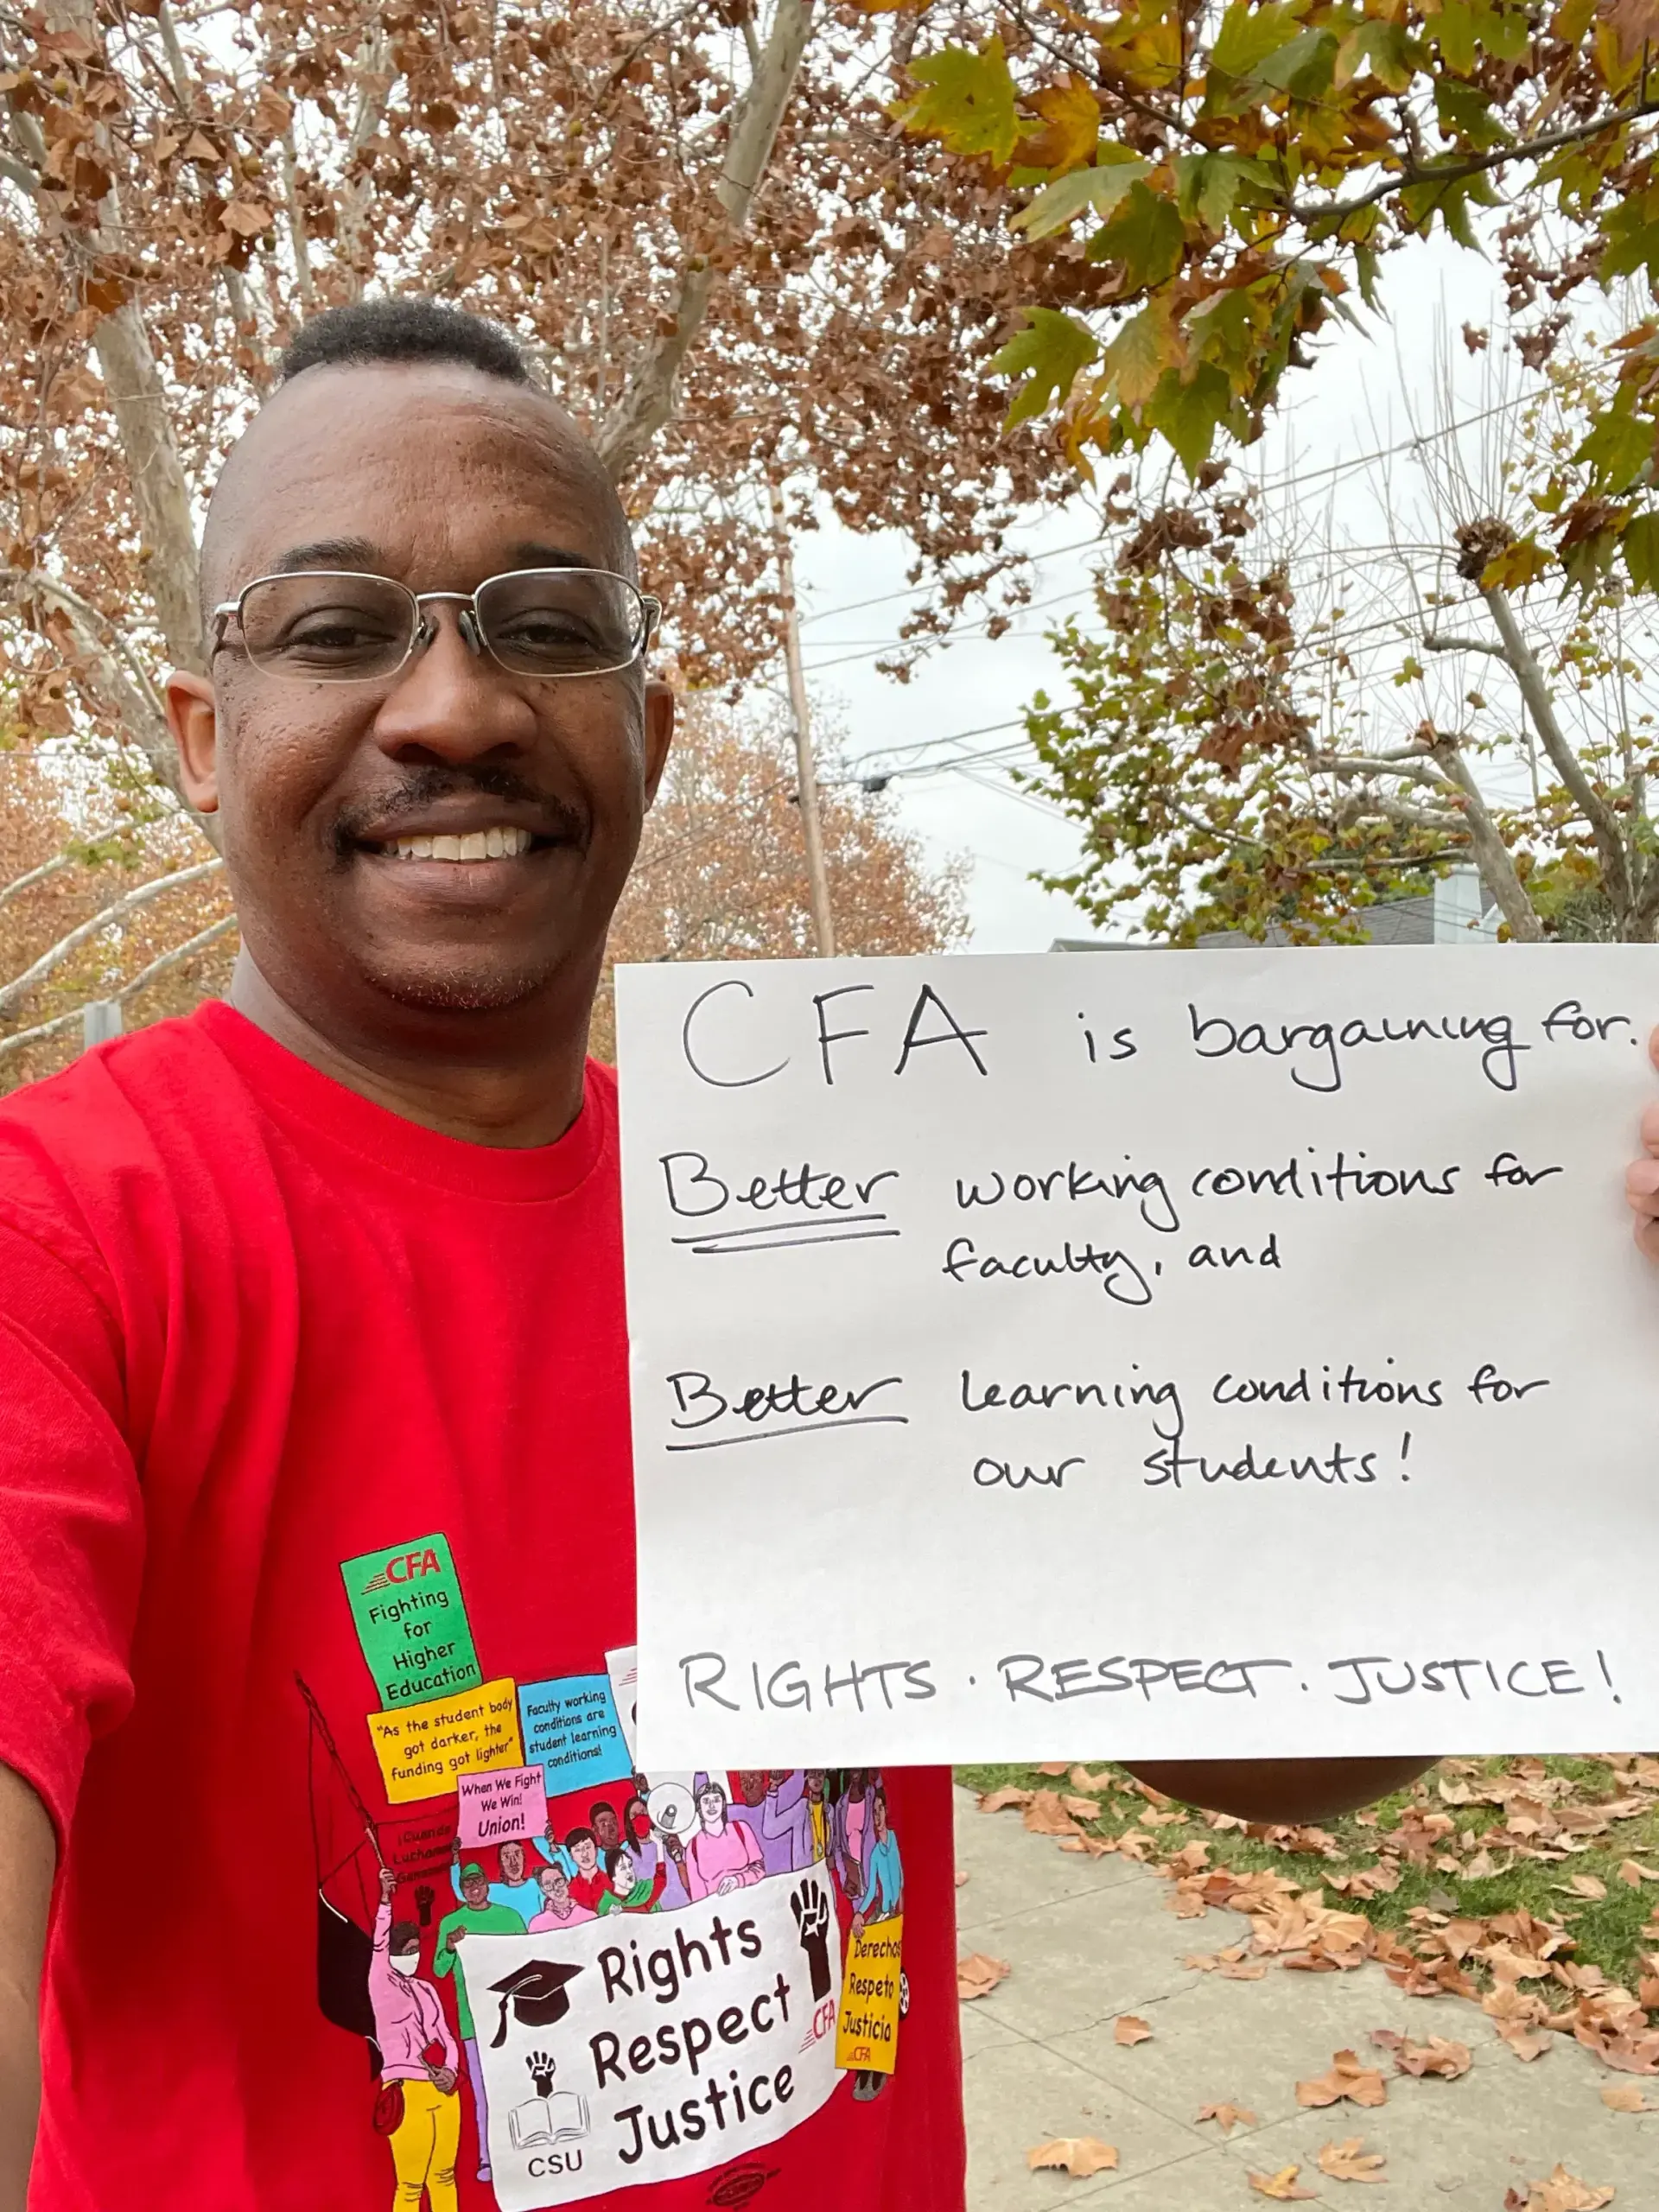 Chris Cox, CFA Associate Vice President, Racial and Social Justice, North, wants better learning conditions for students at the CSU.